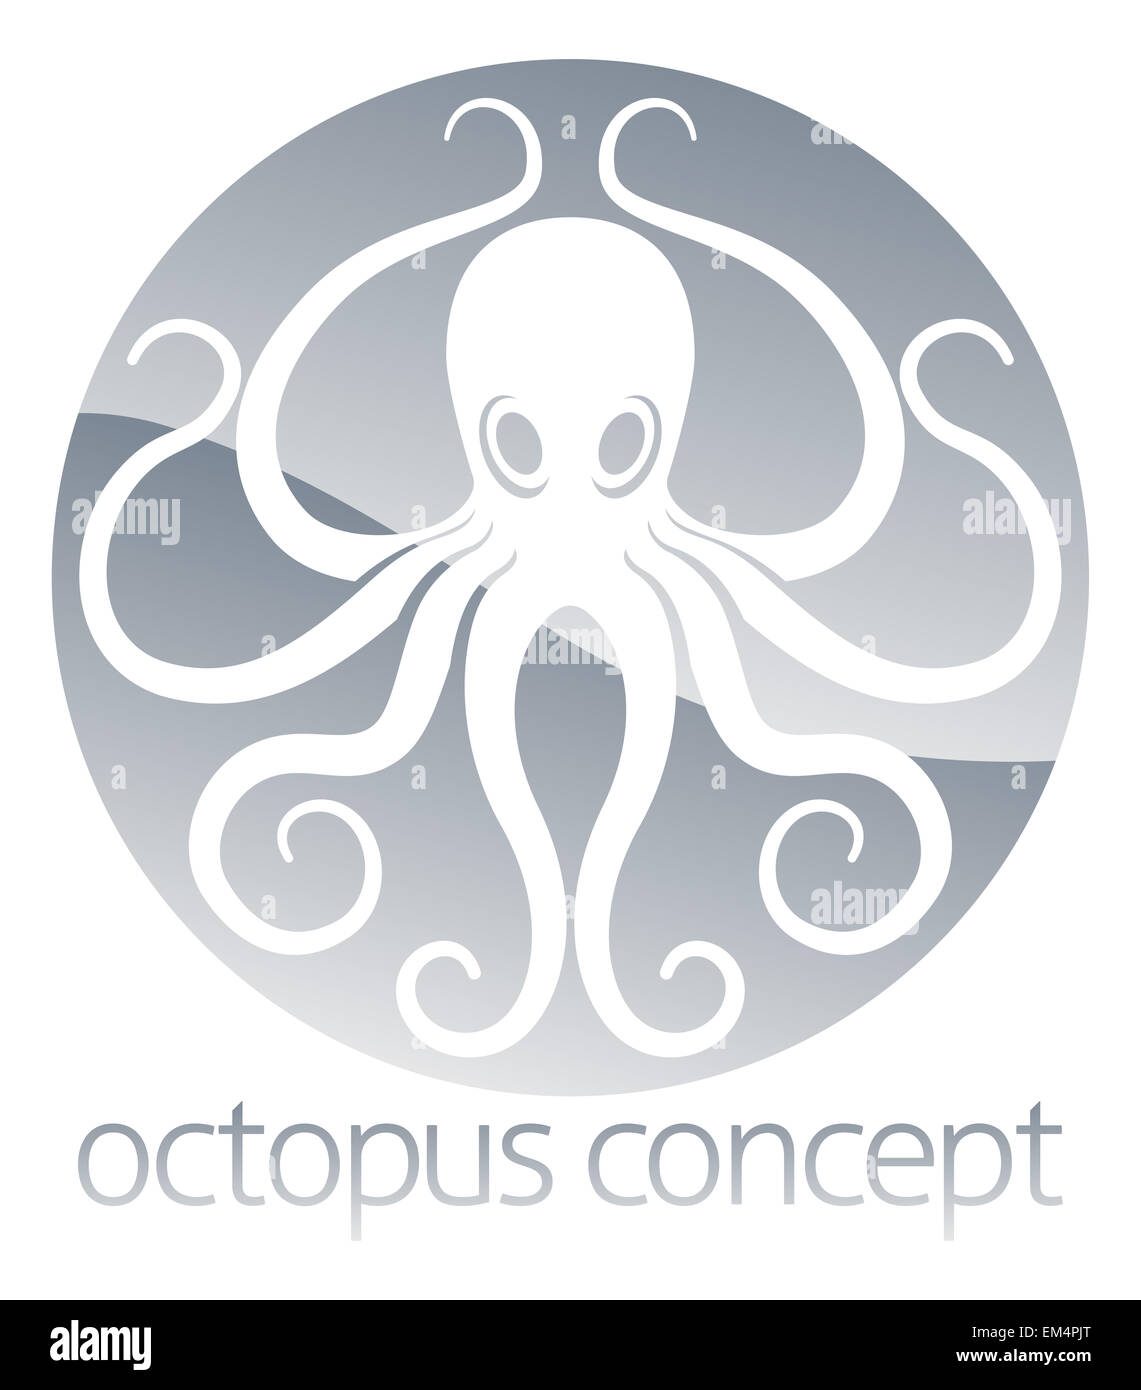 An abstract illustration of an octopus circle concept design Stock Photo